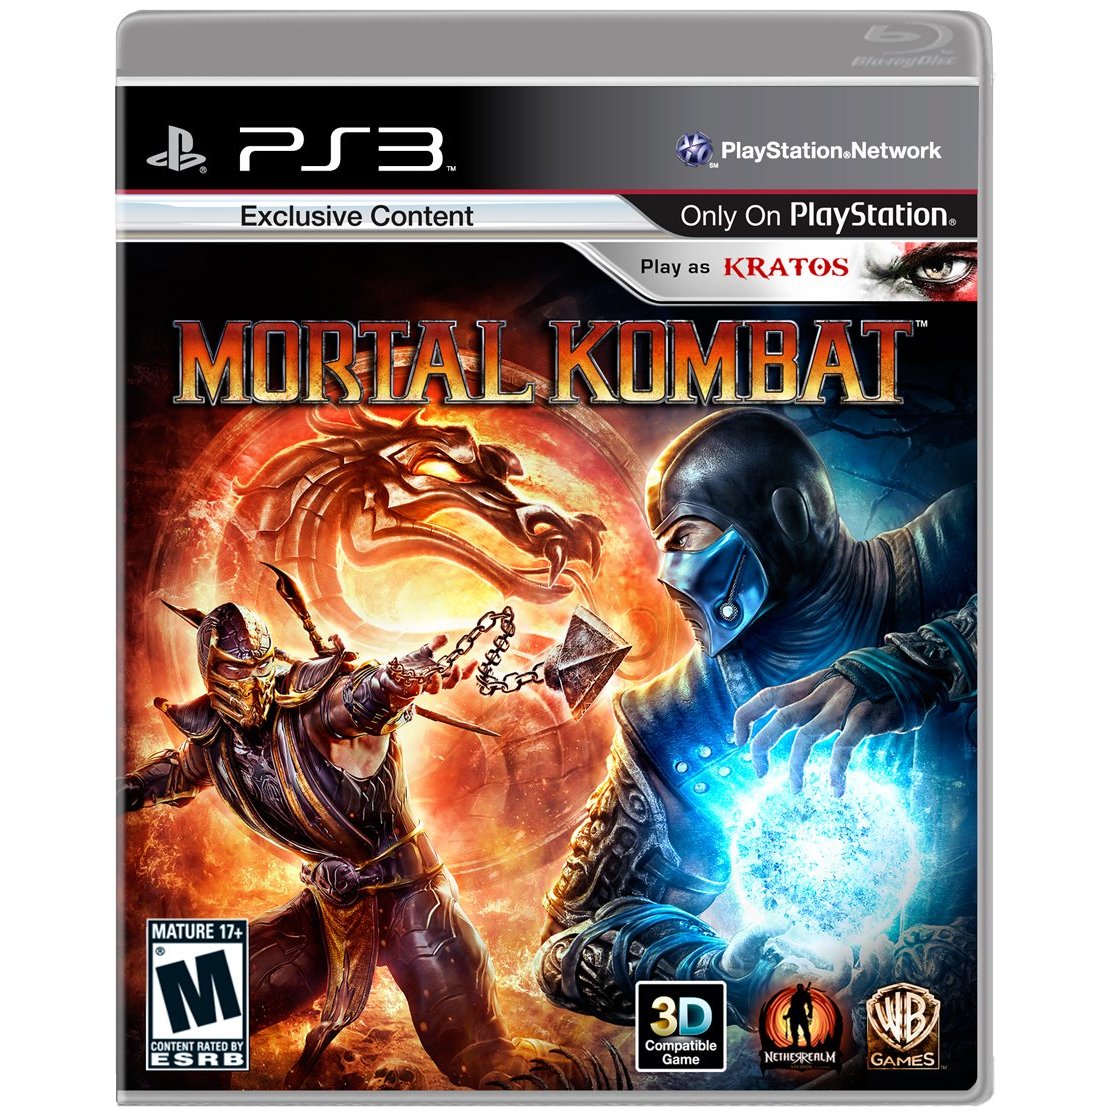 http://thetechjournal.com/wp-content/uploads/images/1202/1328332998-mortal-kombat-video-game-review-1.jpg